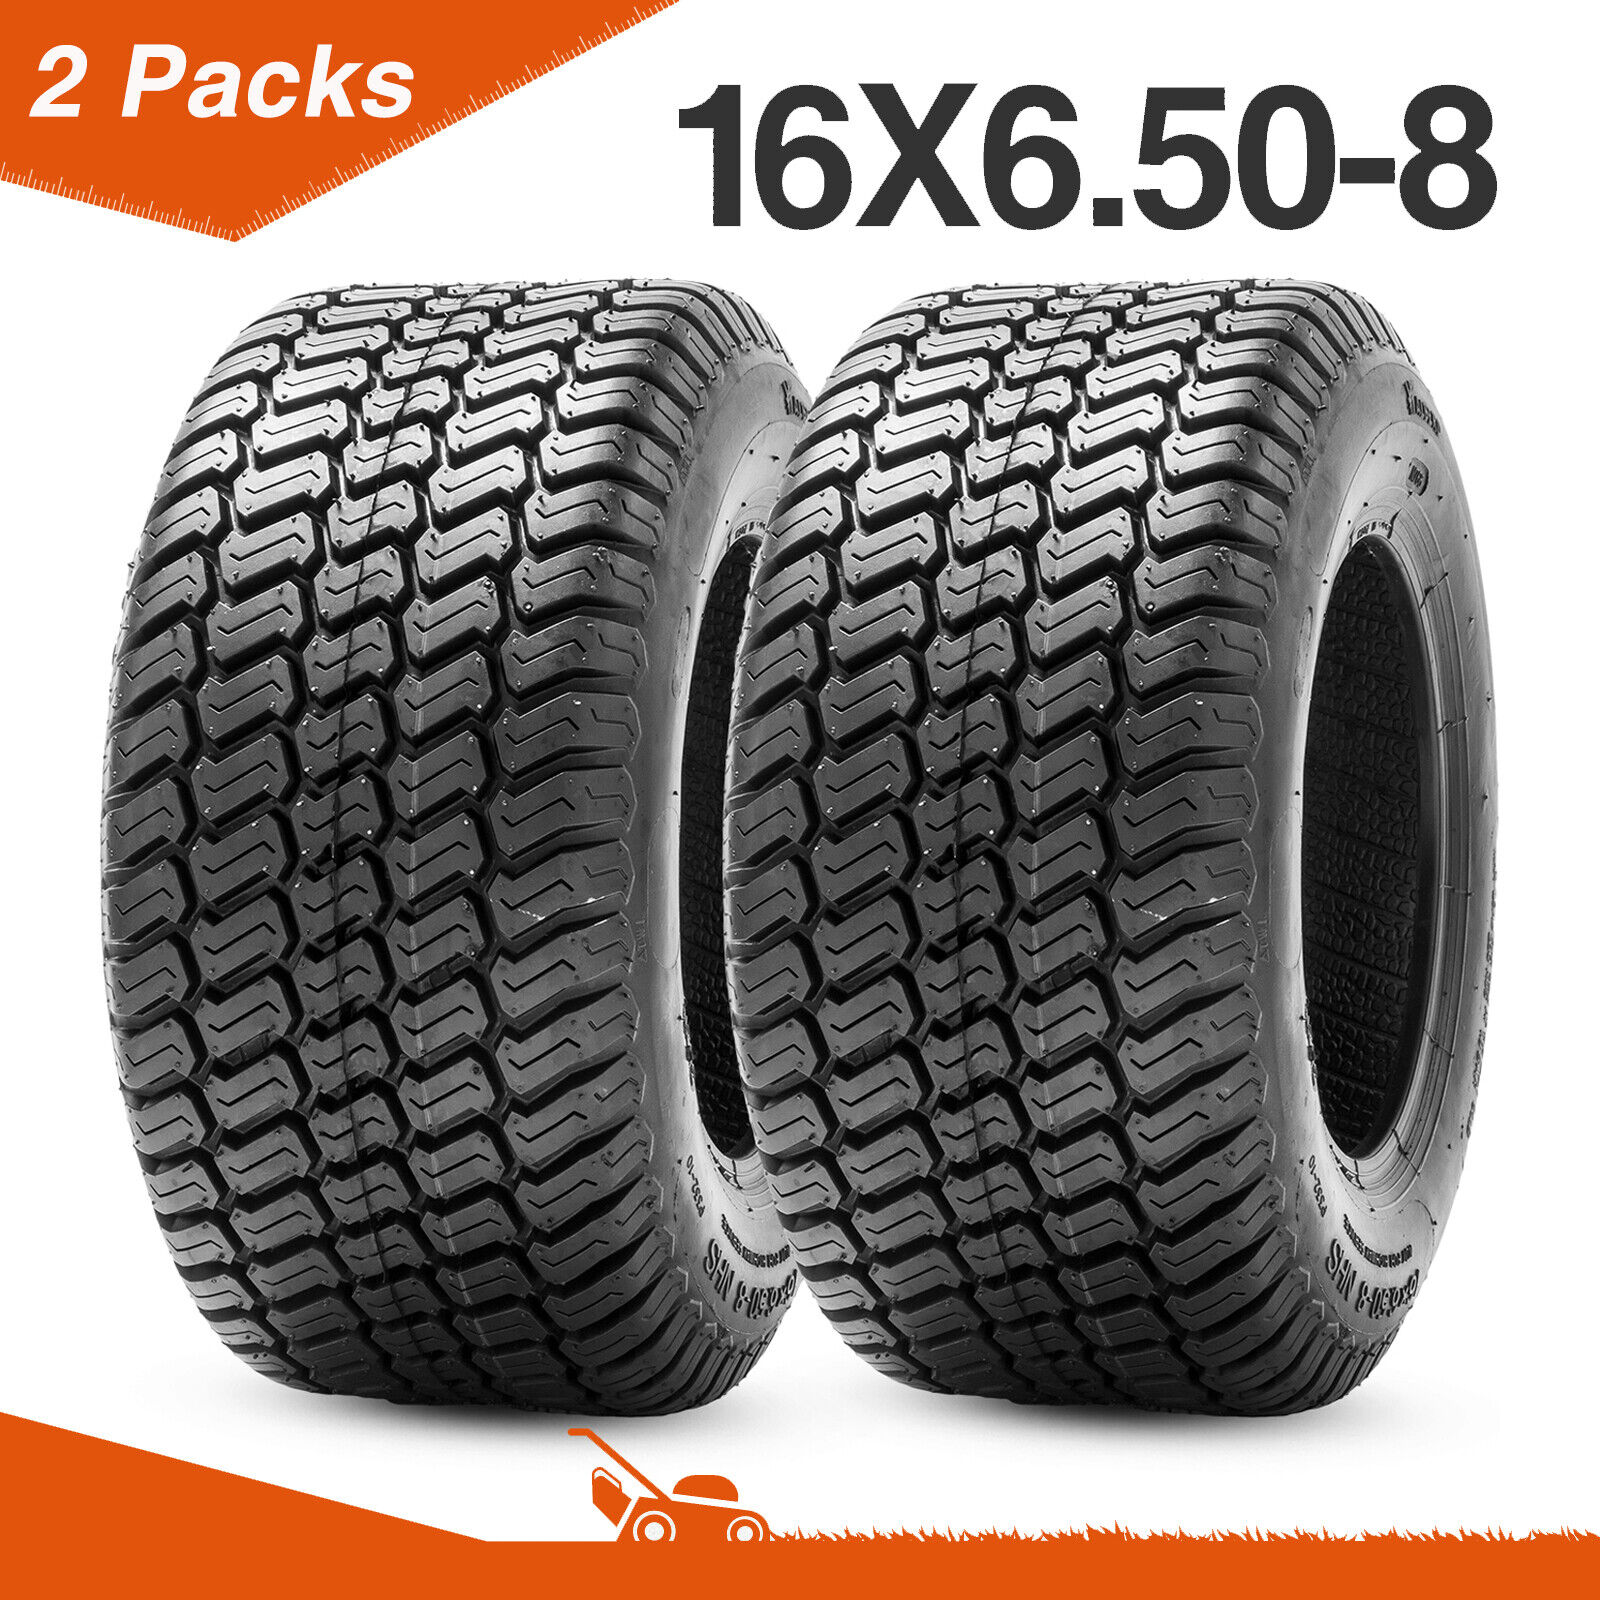 Set 2 16x6.50-8 Lawn Mower Tires 16x6.5x8 4Ply Turf Mower Tractor Tyres Tubeless